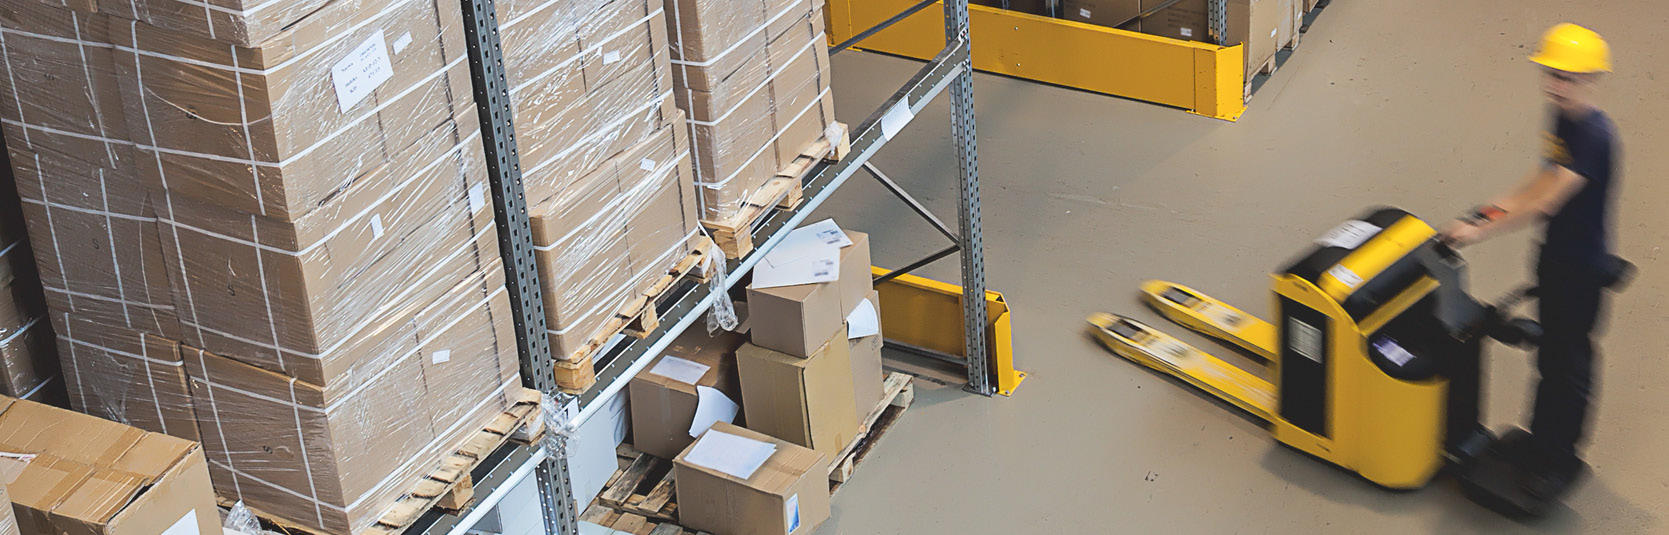 Wholesale distribution solutions guide